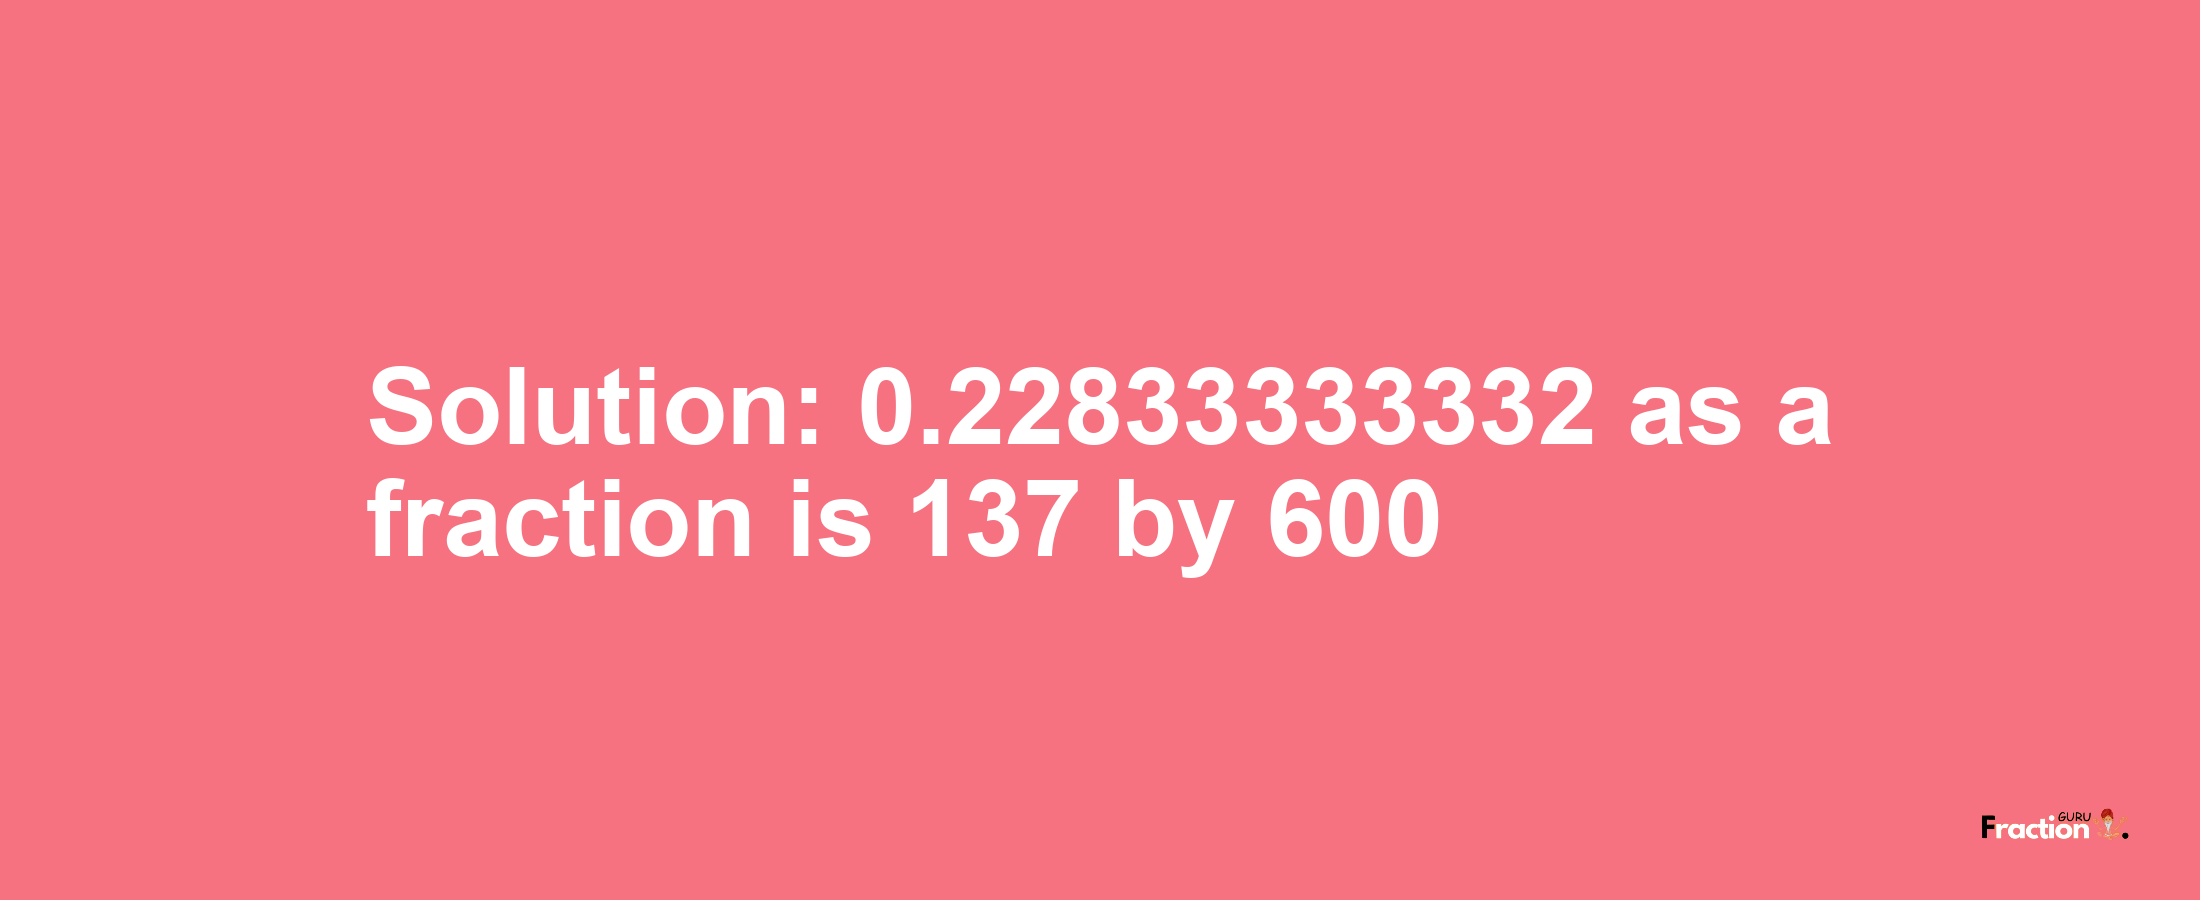 Solution:0.22833333332 as a fraction is 137/600